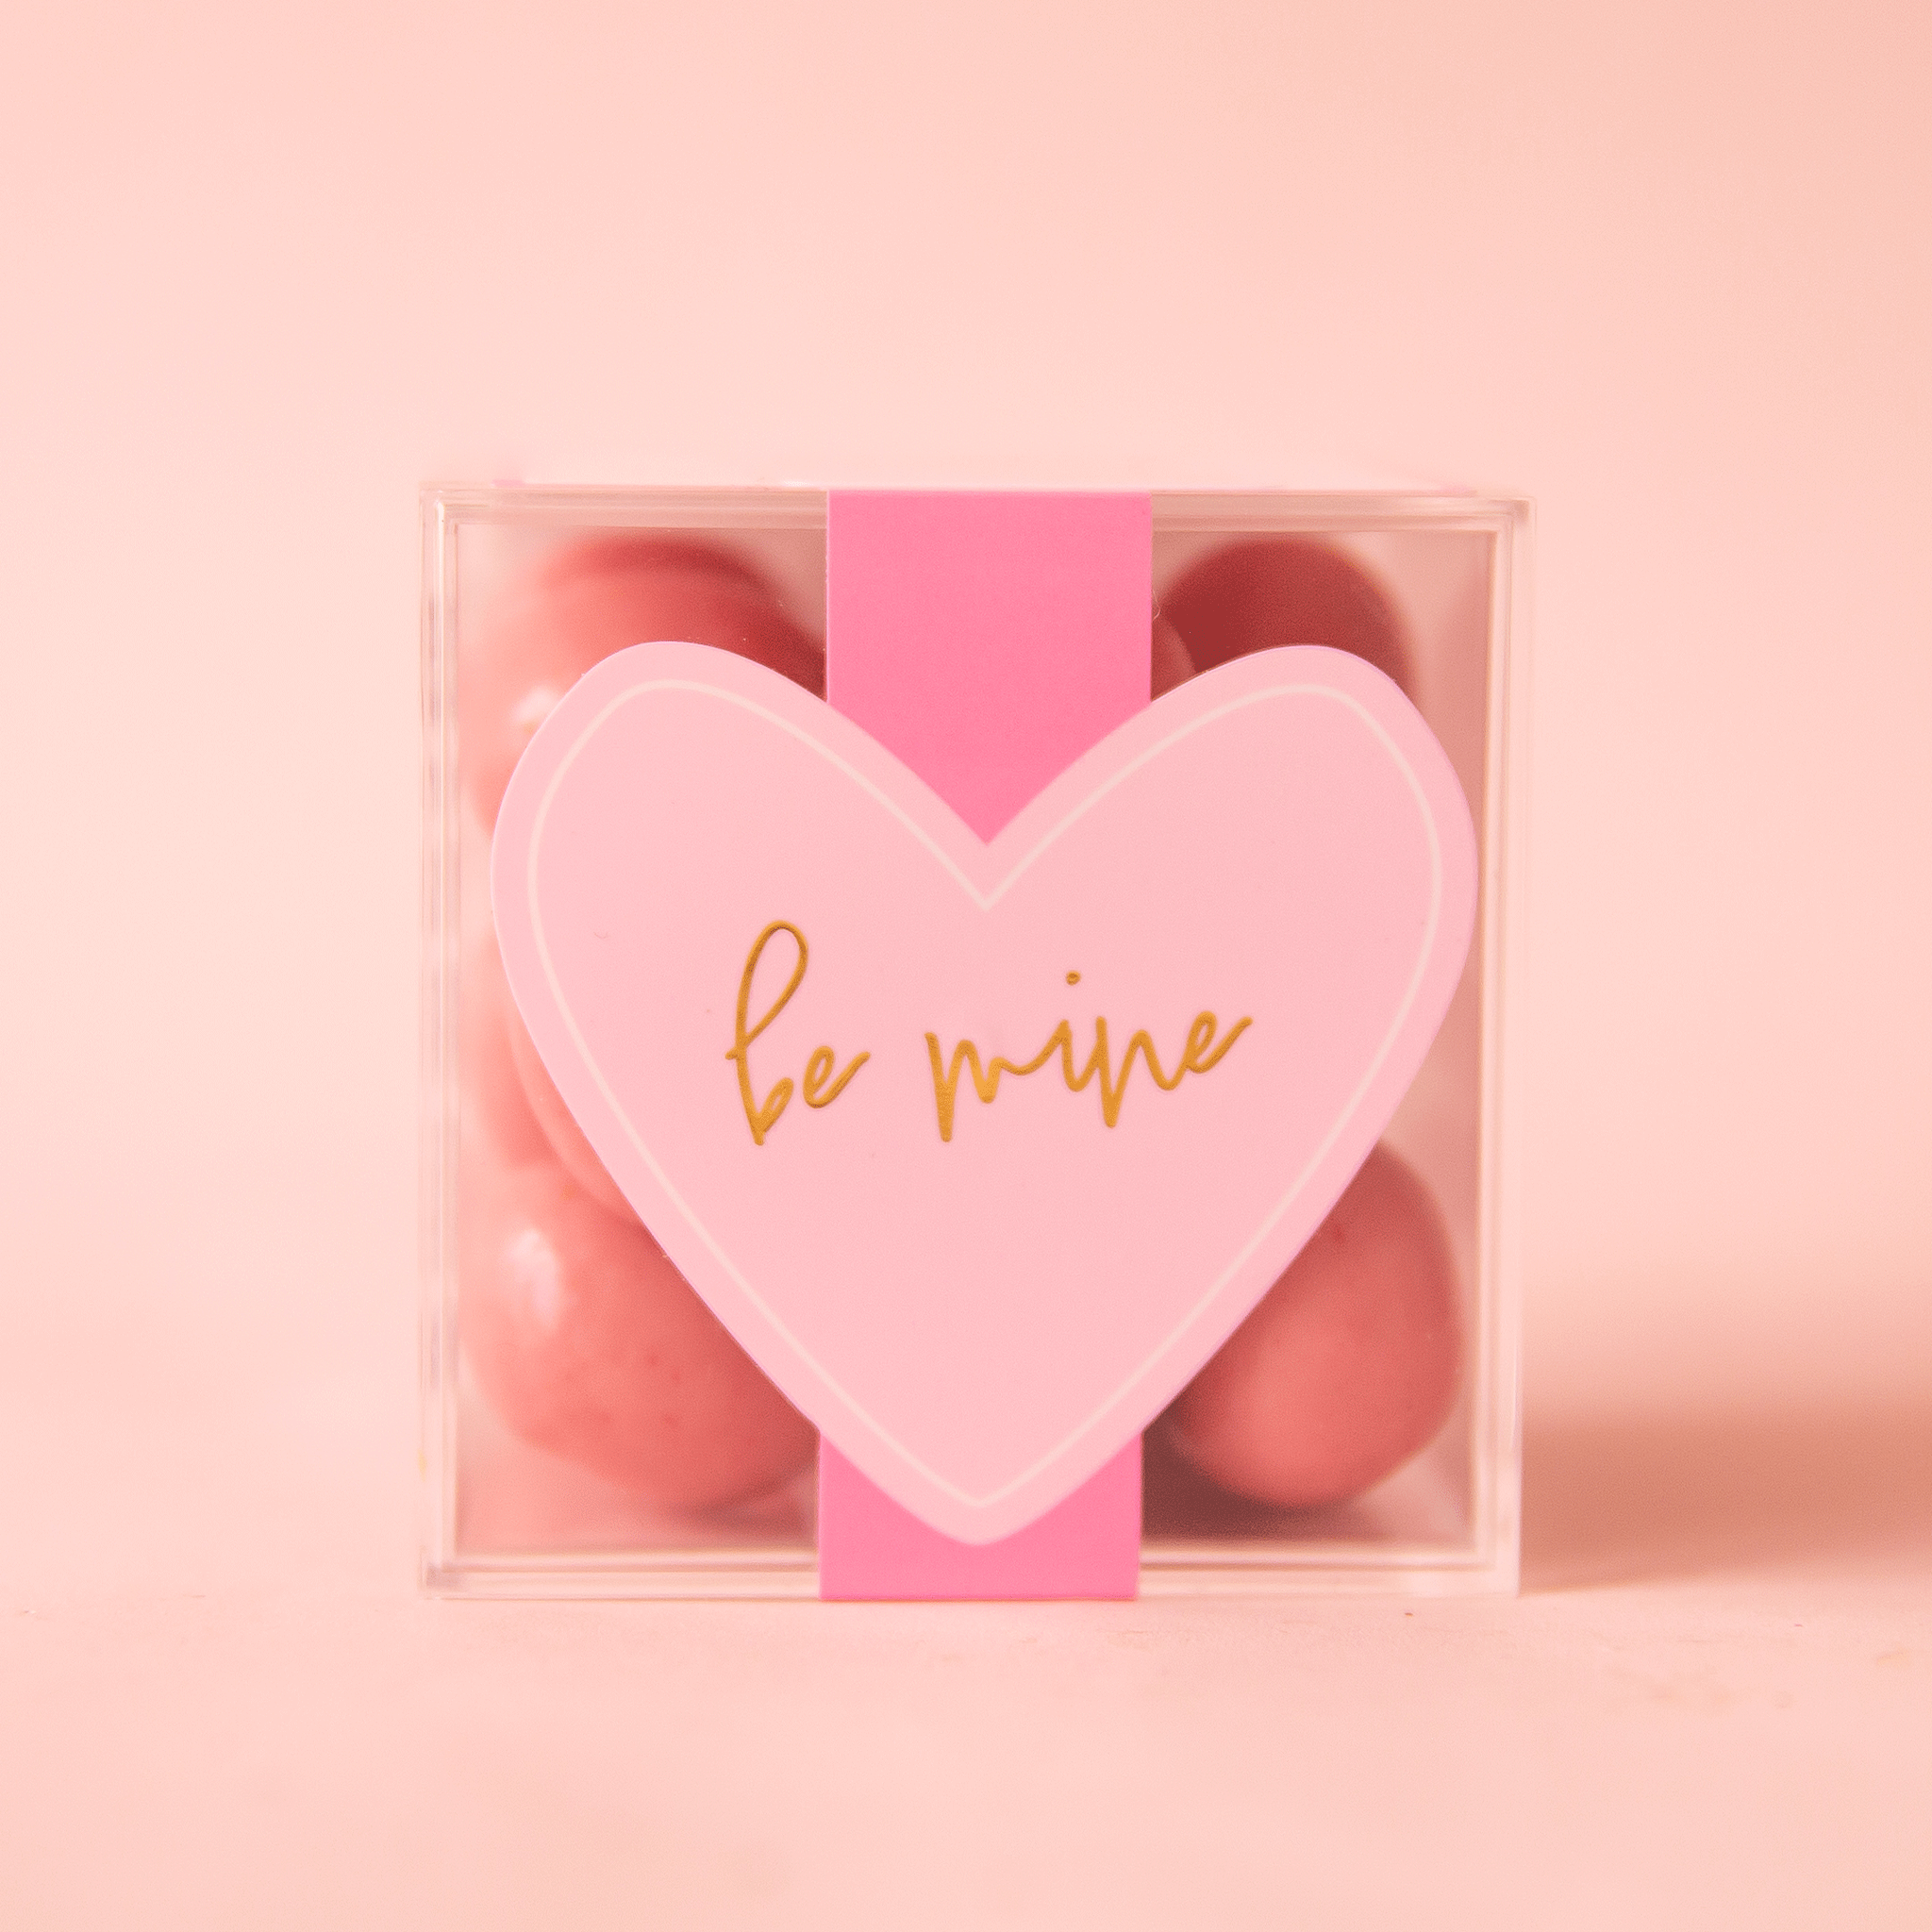 On a pink background is a clear acrylic box filled with pink shortcake cookie candies.